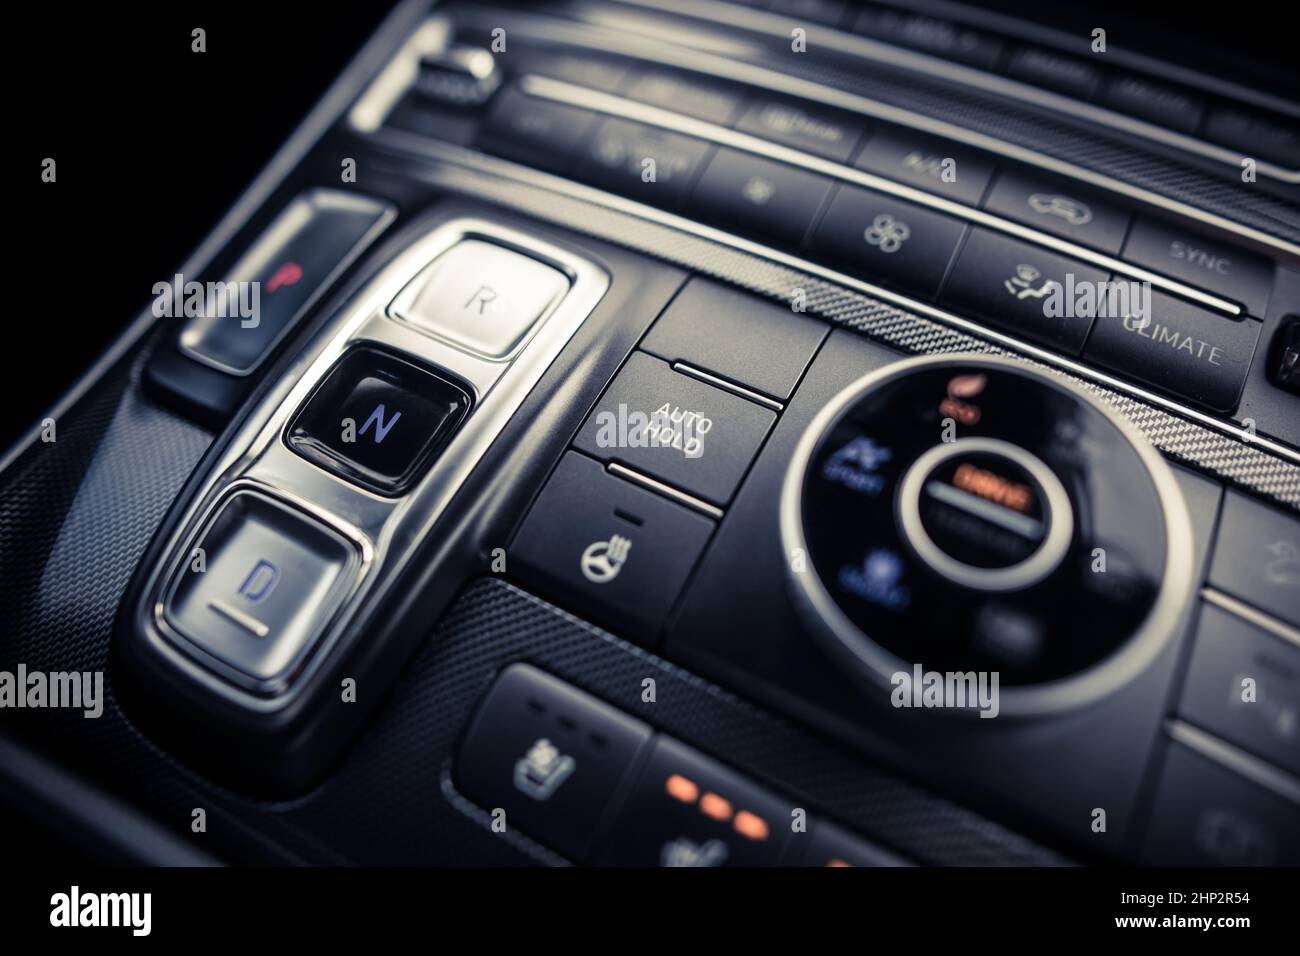 Close up shot of an automatic button gear shifter on a central console in a new car. Stock Photo